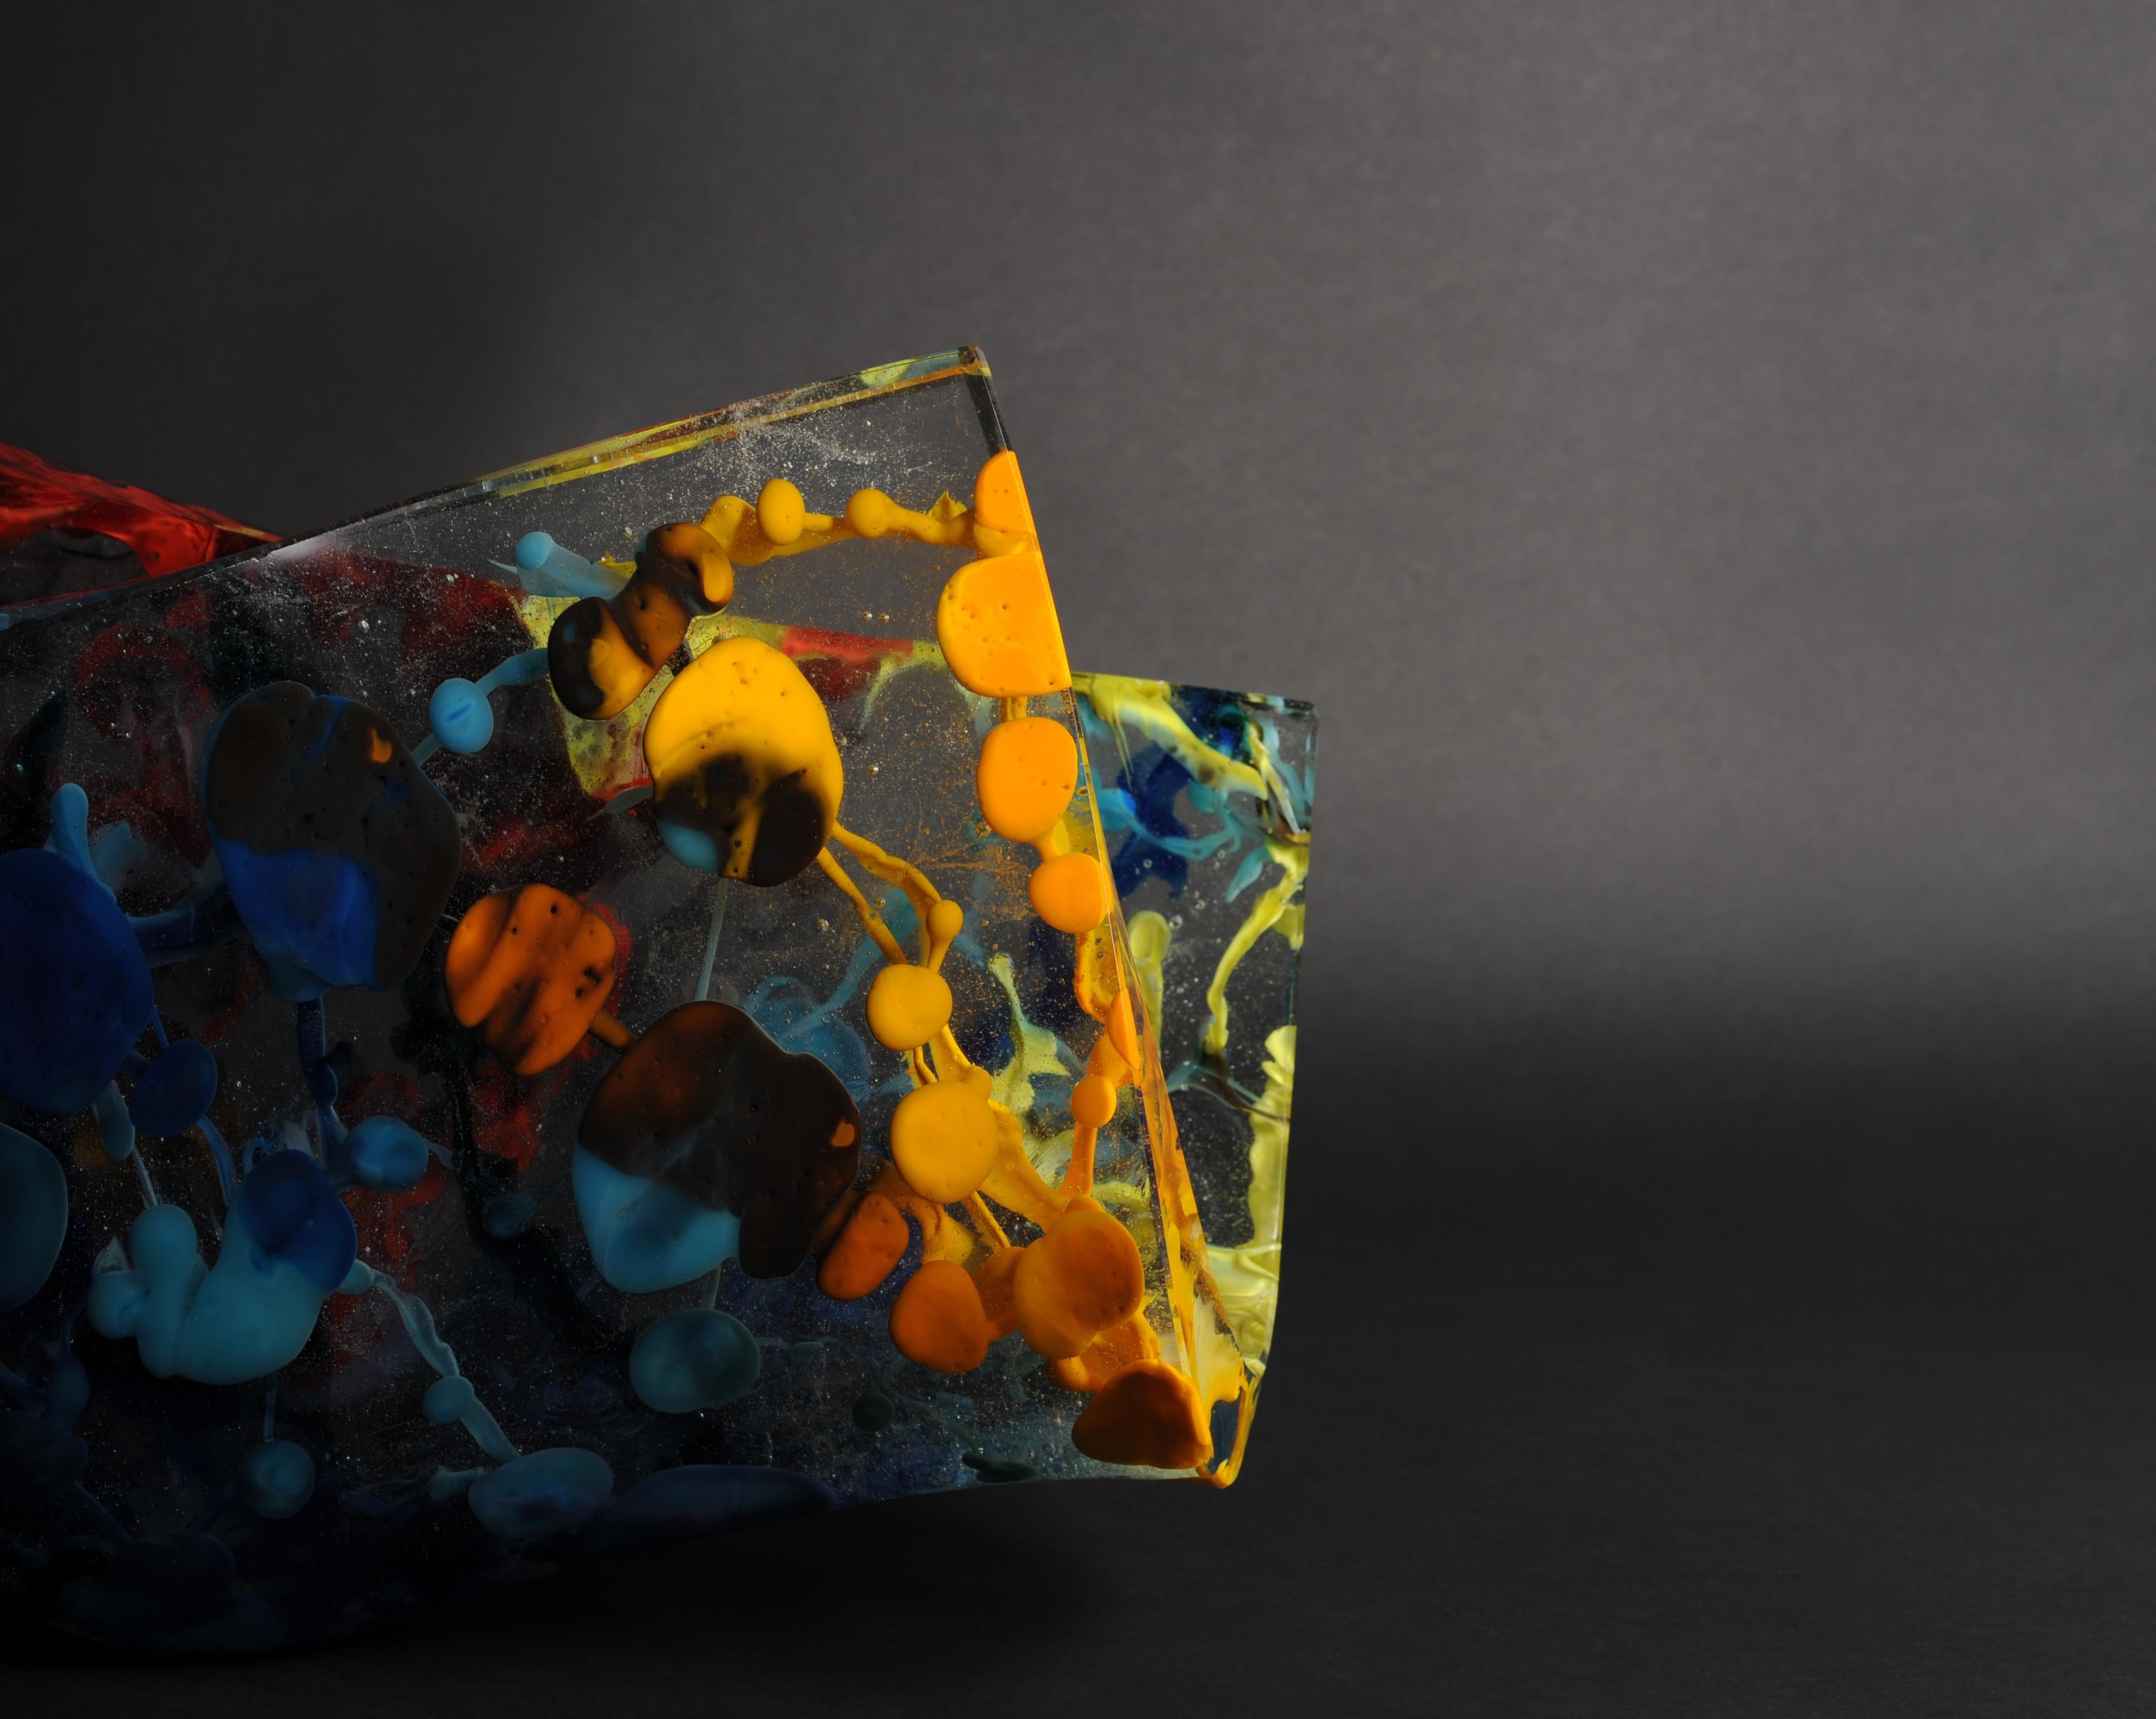 All glass sculpture perfect for a colorful touch in any space.

Born from a collision of ideologies, blending the traditional and the contemporary, with technical and artisanal methods. Under our commitment to offer the work of world-renowed